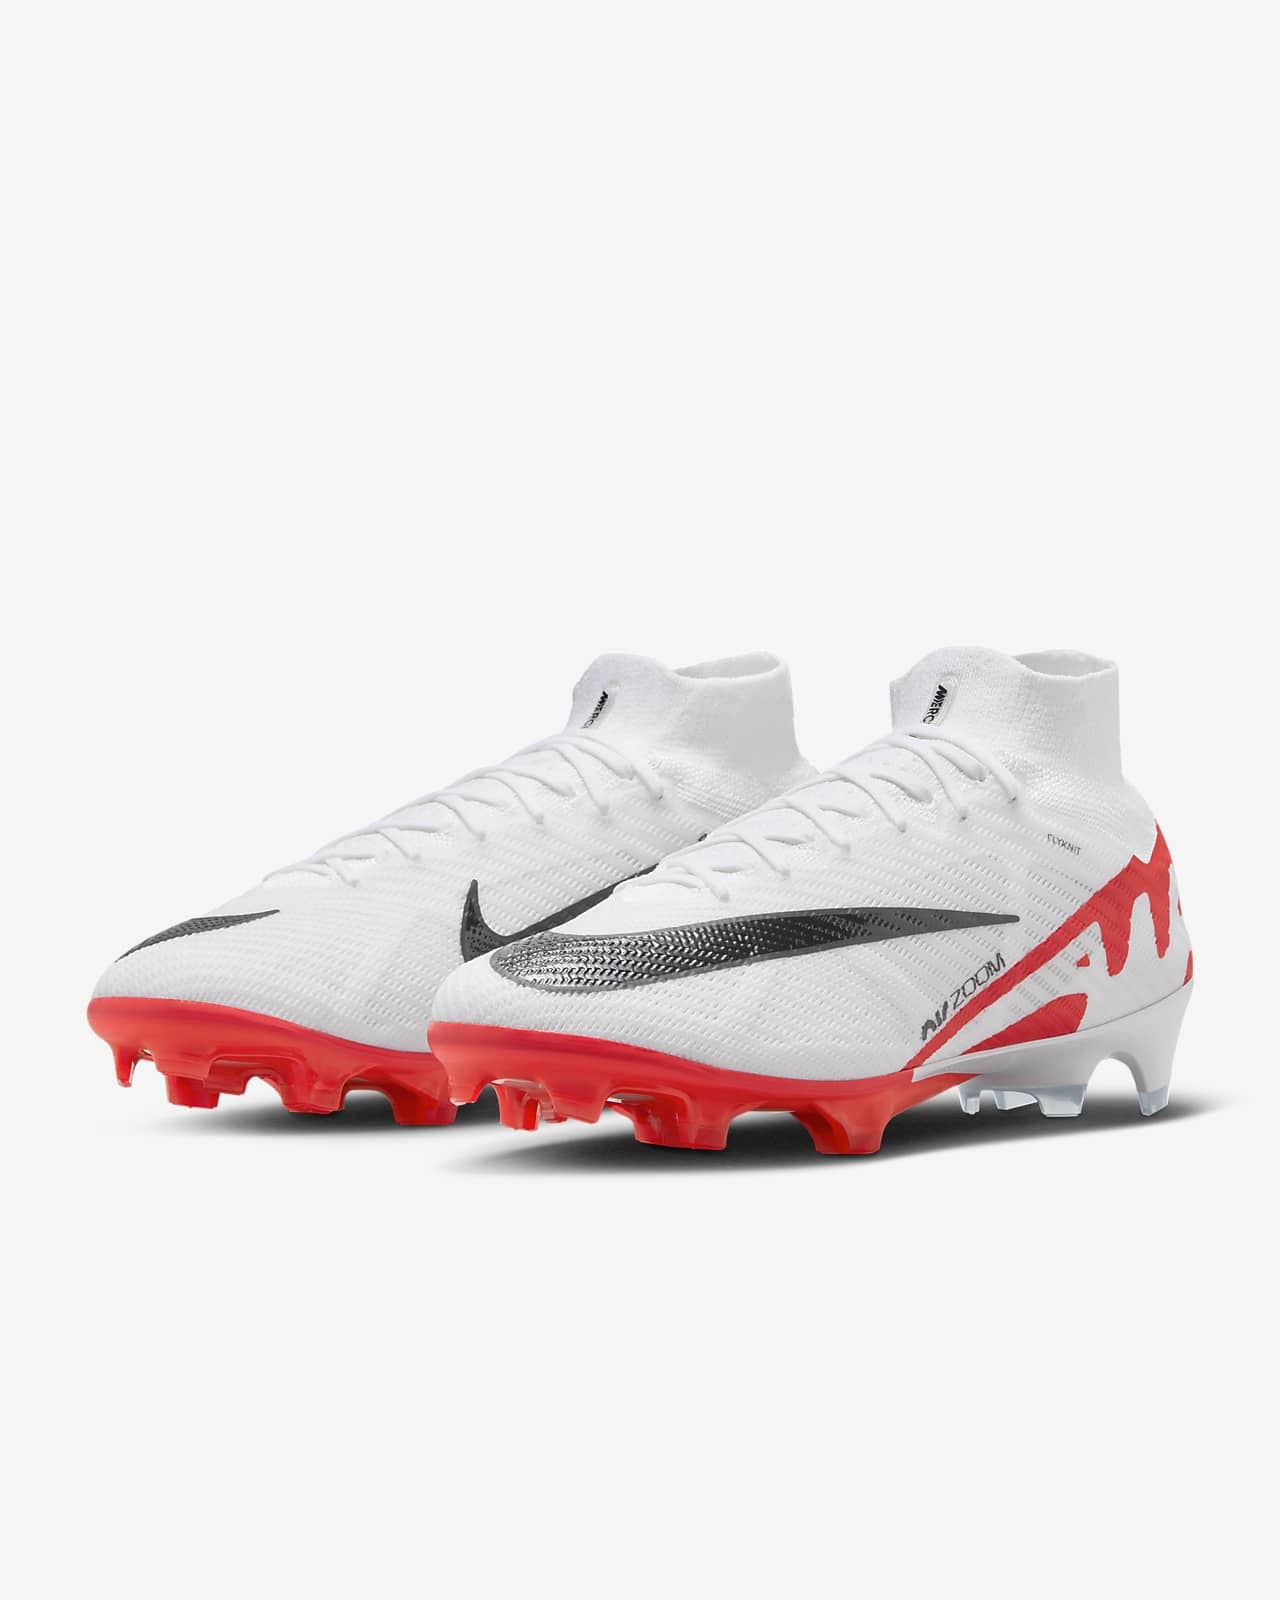 Nike Mercurial Superfly 9 Elite Firm-Ground High-Top Soccer Cleats